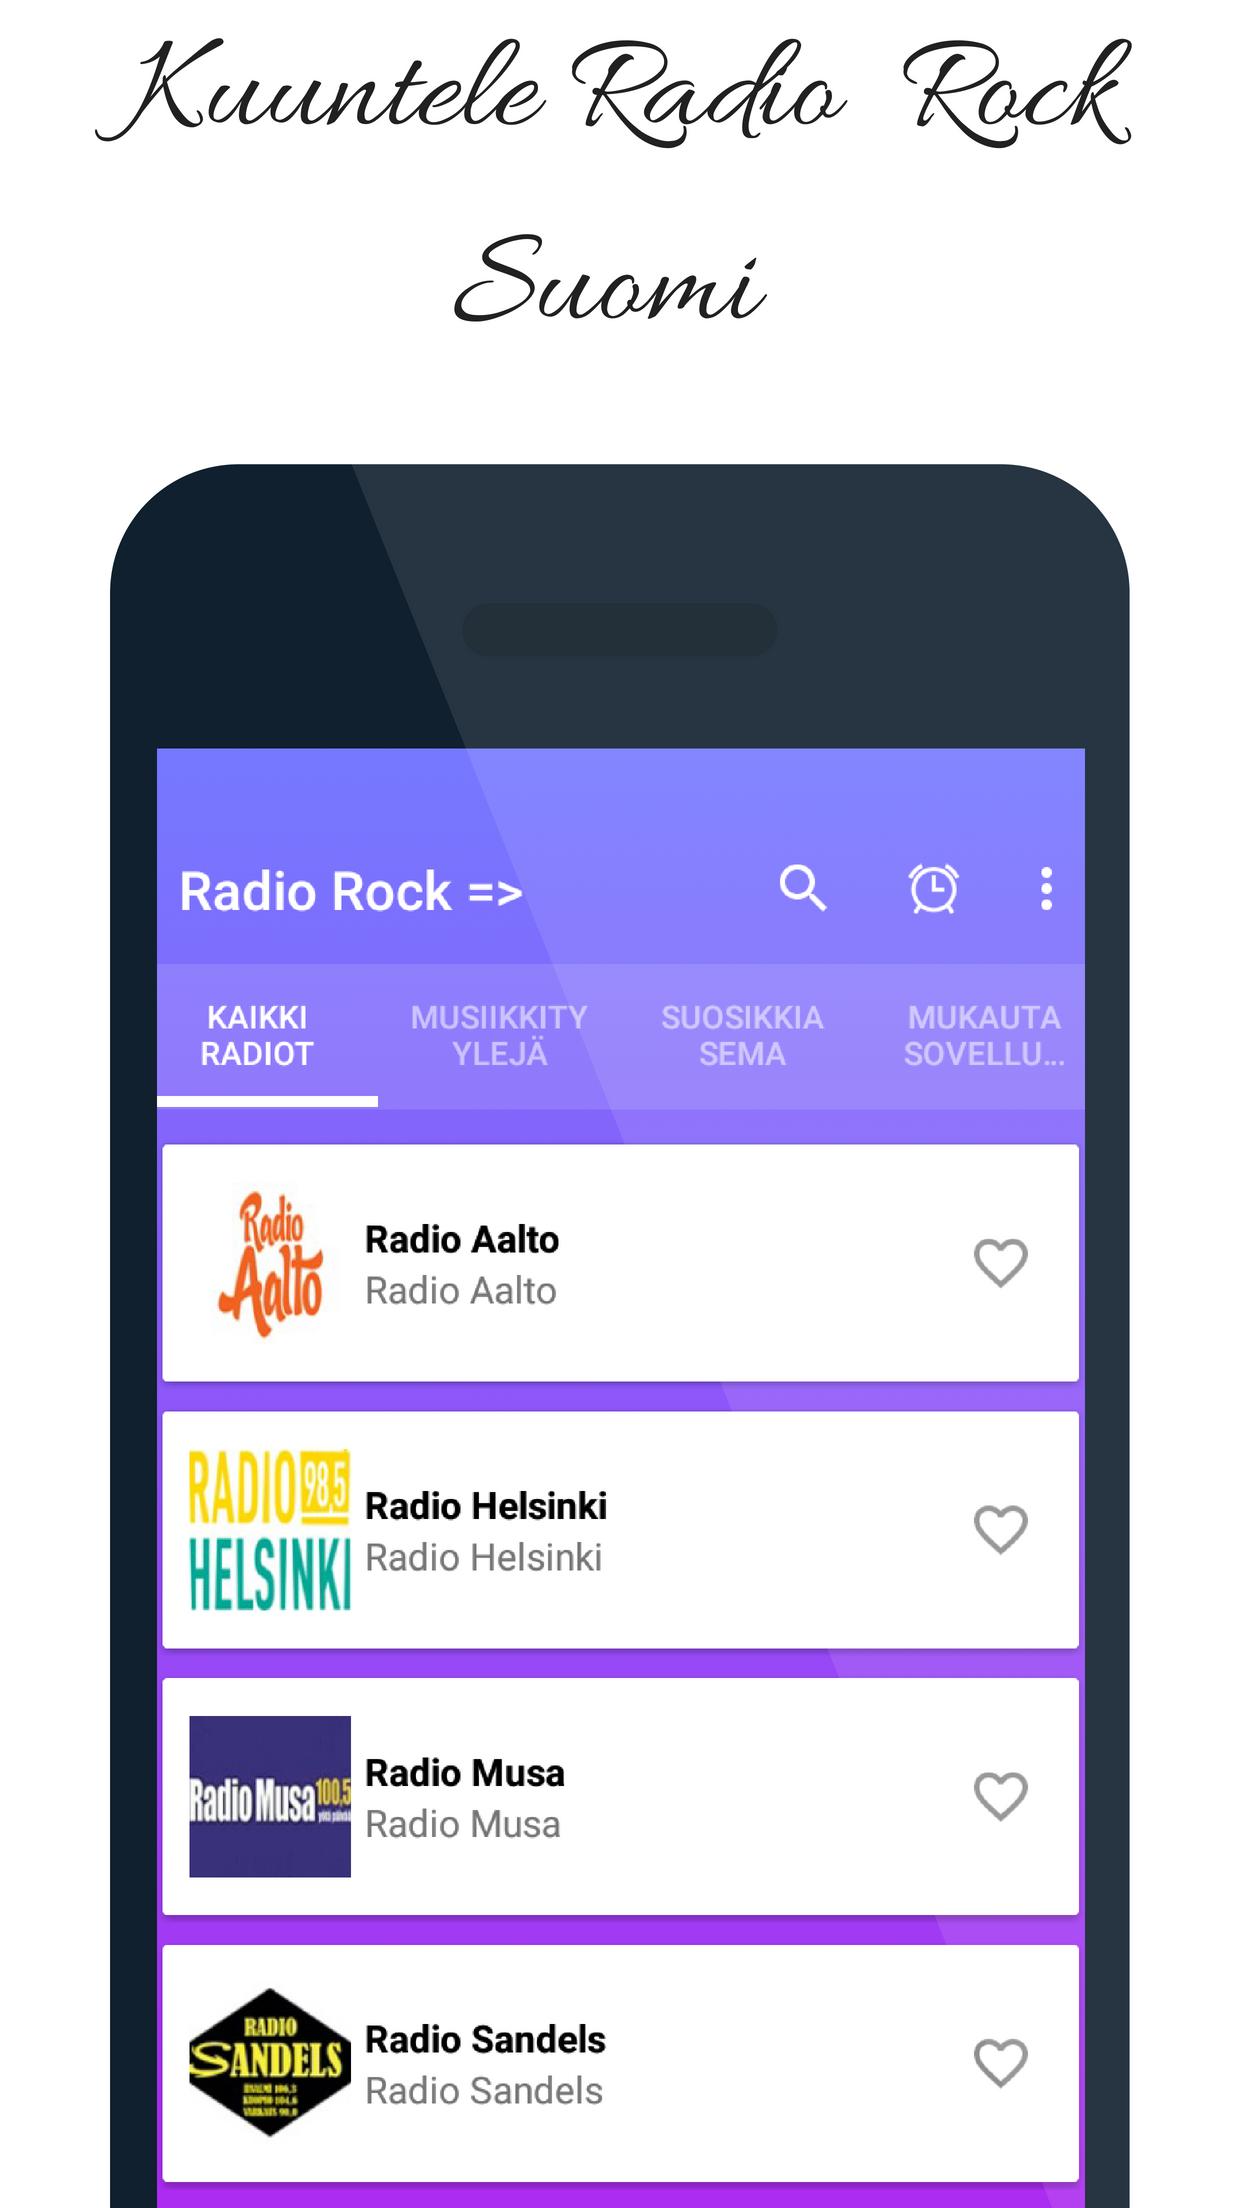 Radio Rock Suomi Helsinki for Android - APK Download